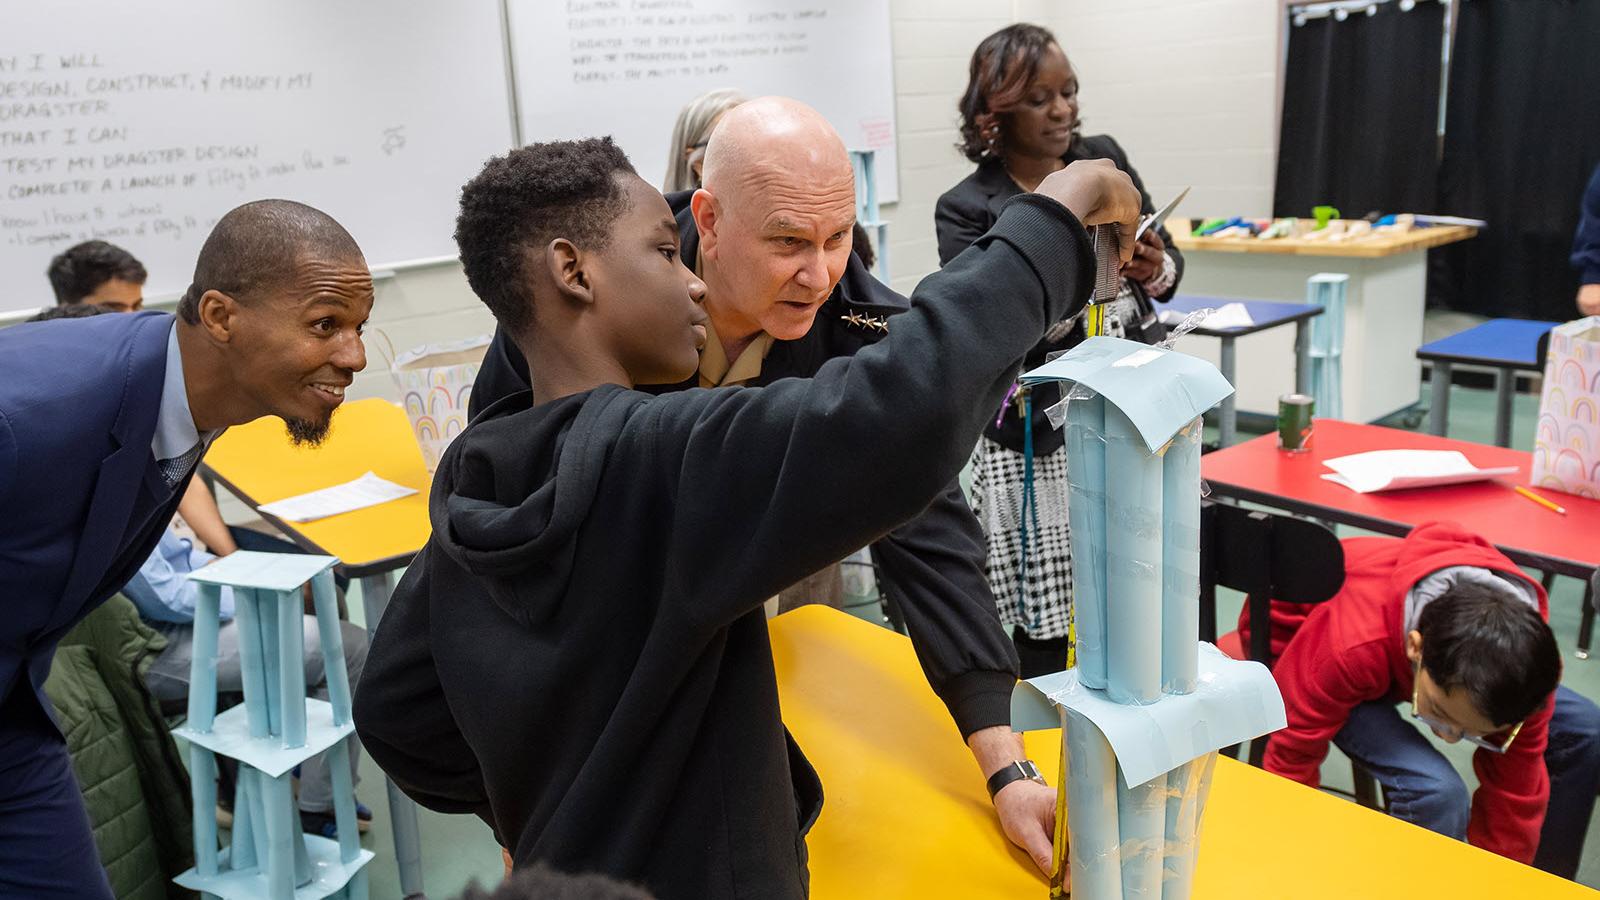 Walt Whitman Middle School students impress Vice Chairman of the Joint Chiefs of Staff as they demonstrated their engineering skills with a special STEM challenge